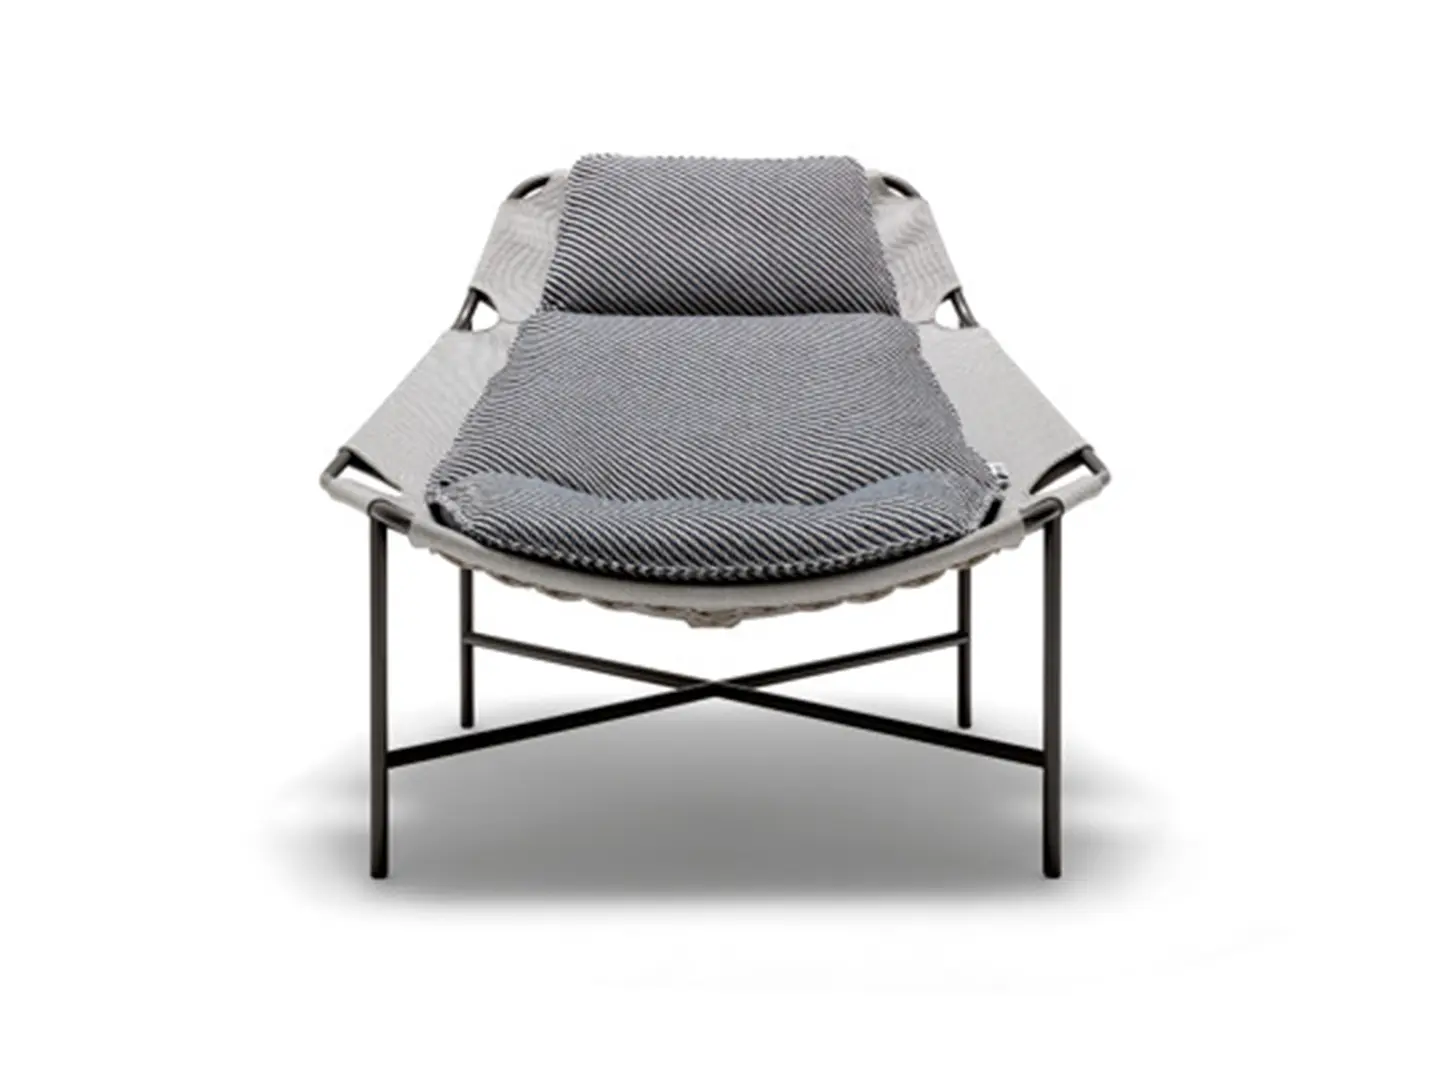 rolf benz, jackout, nichetto, outdoor, armchair, product, design, salone milano